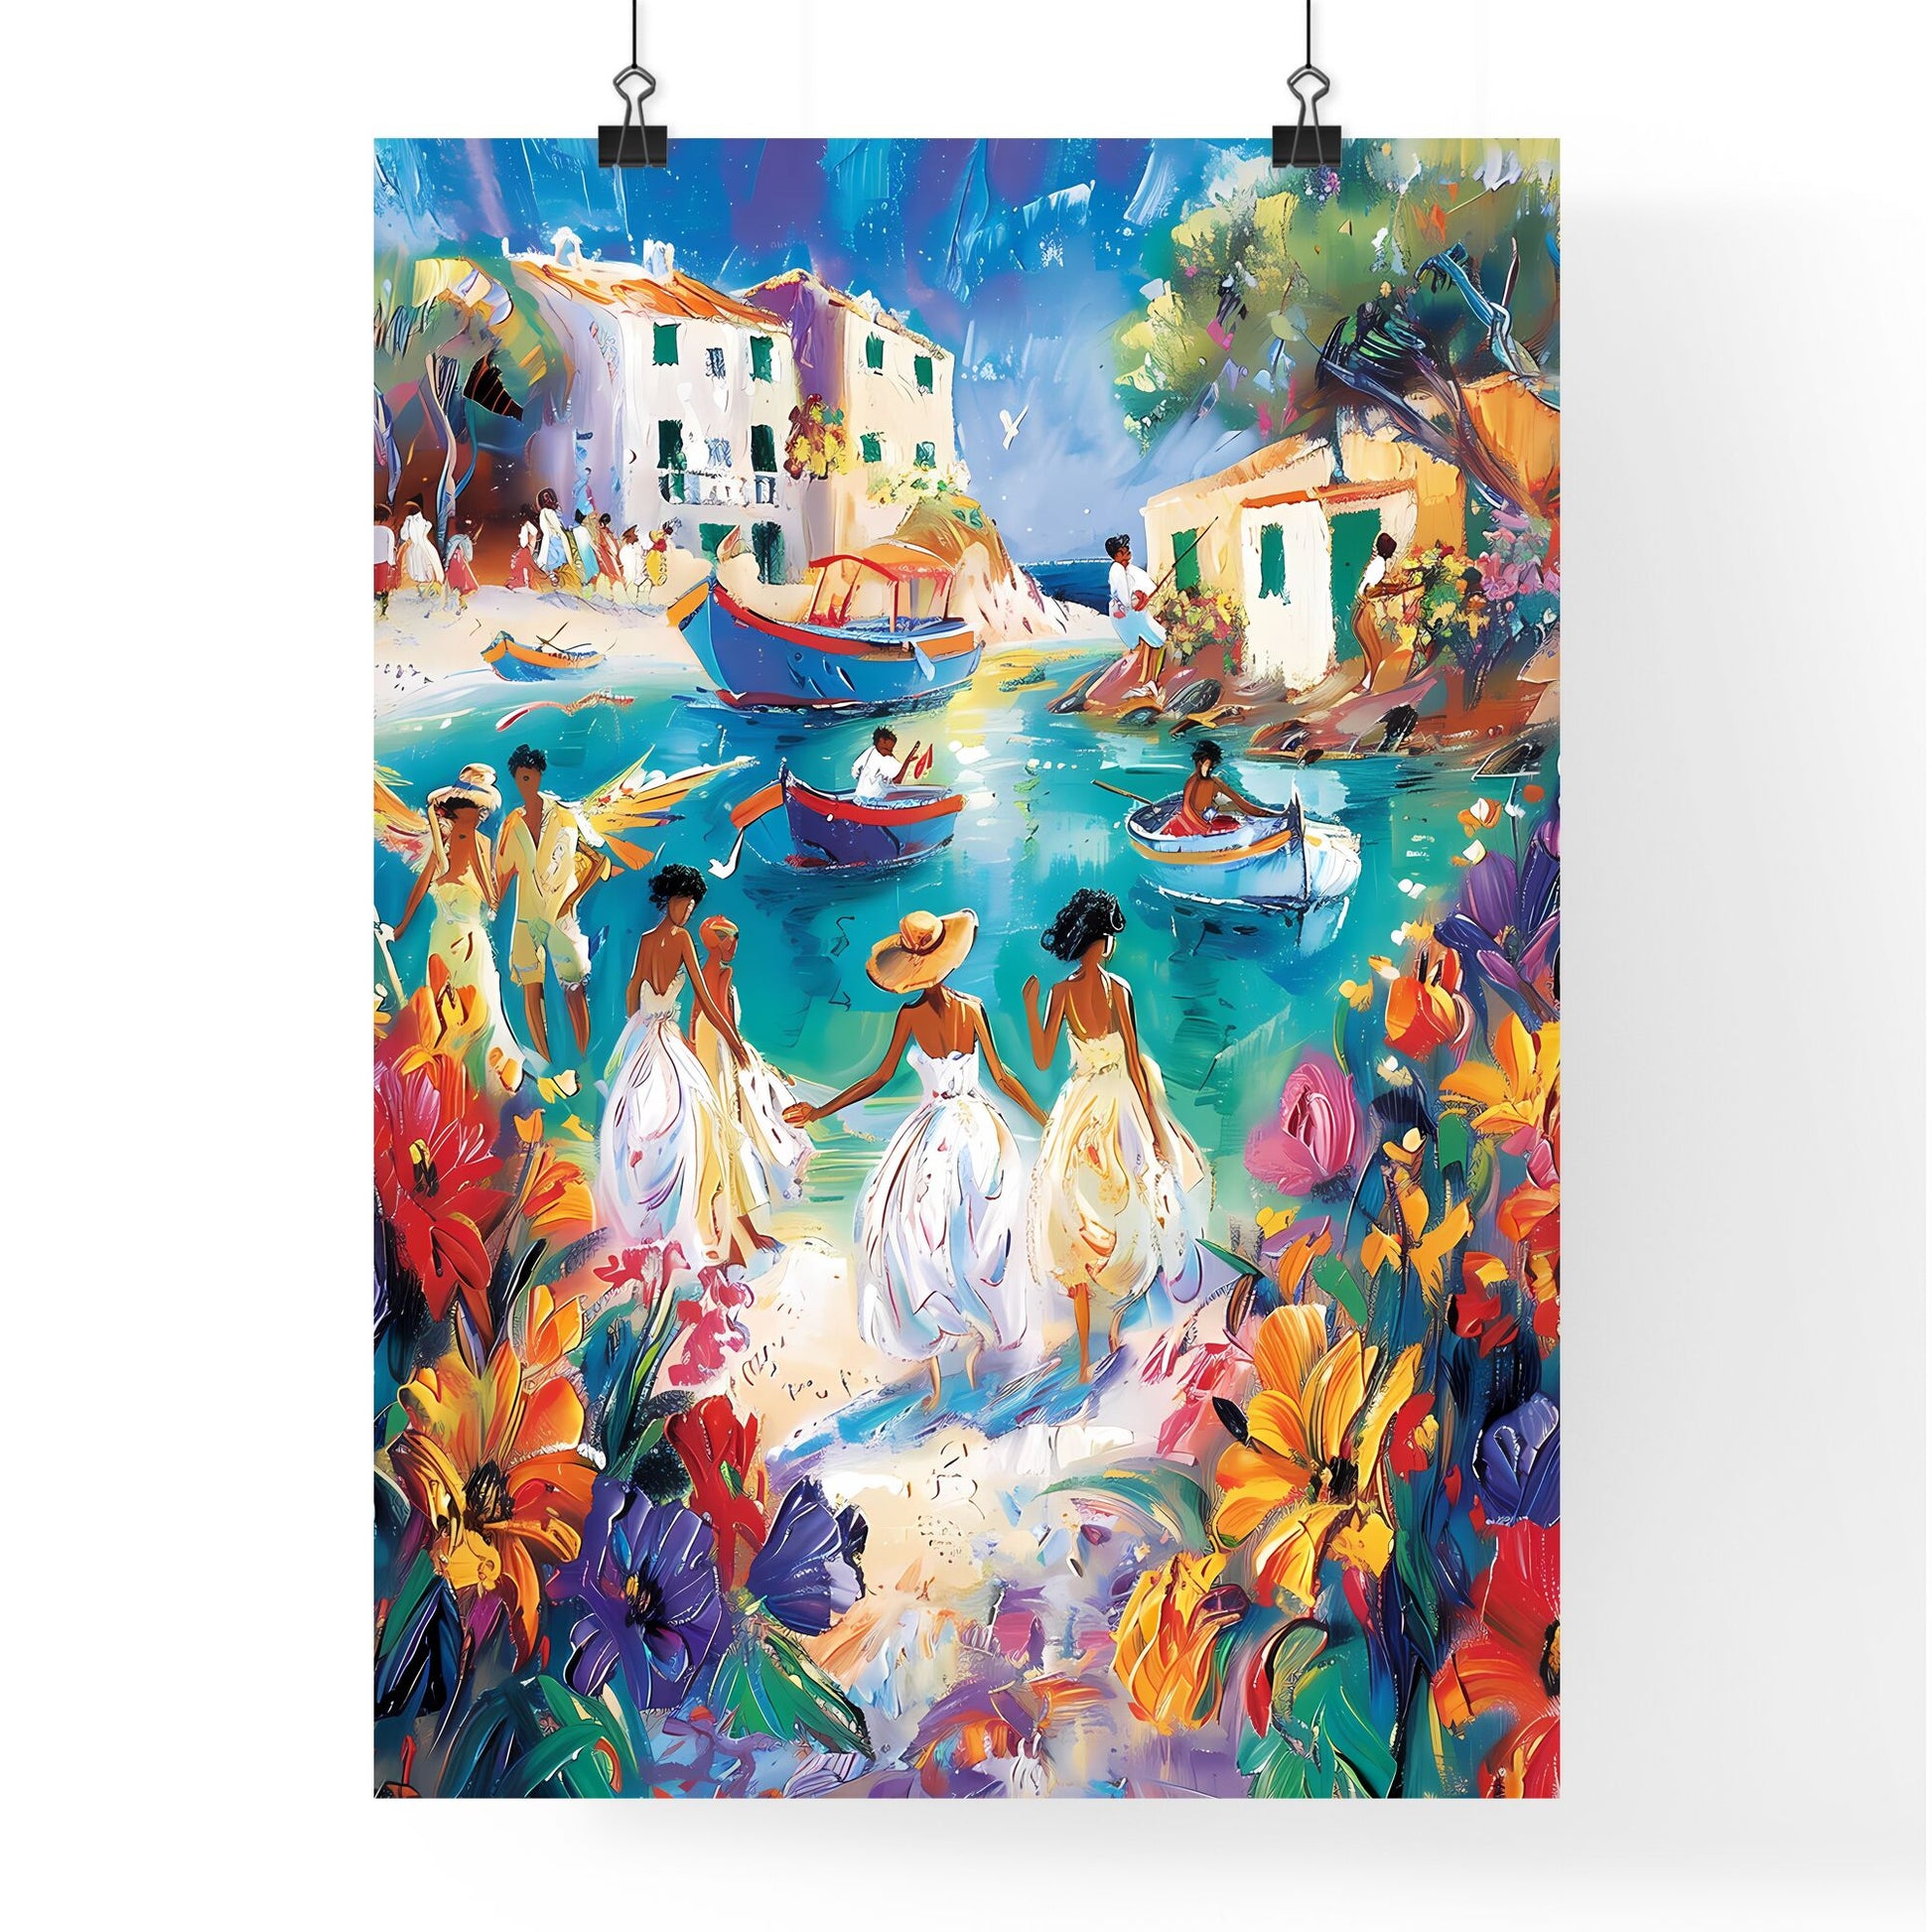 Enchanting Italian Seaside Village Painting: Colorful Houses, Azure Waters, and Lively Locals Default Title